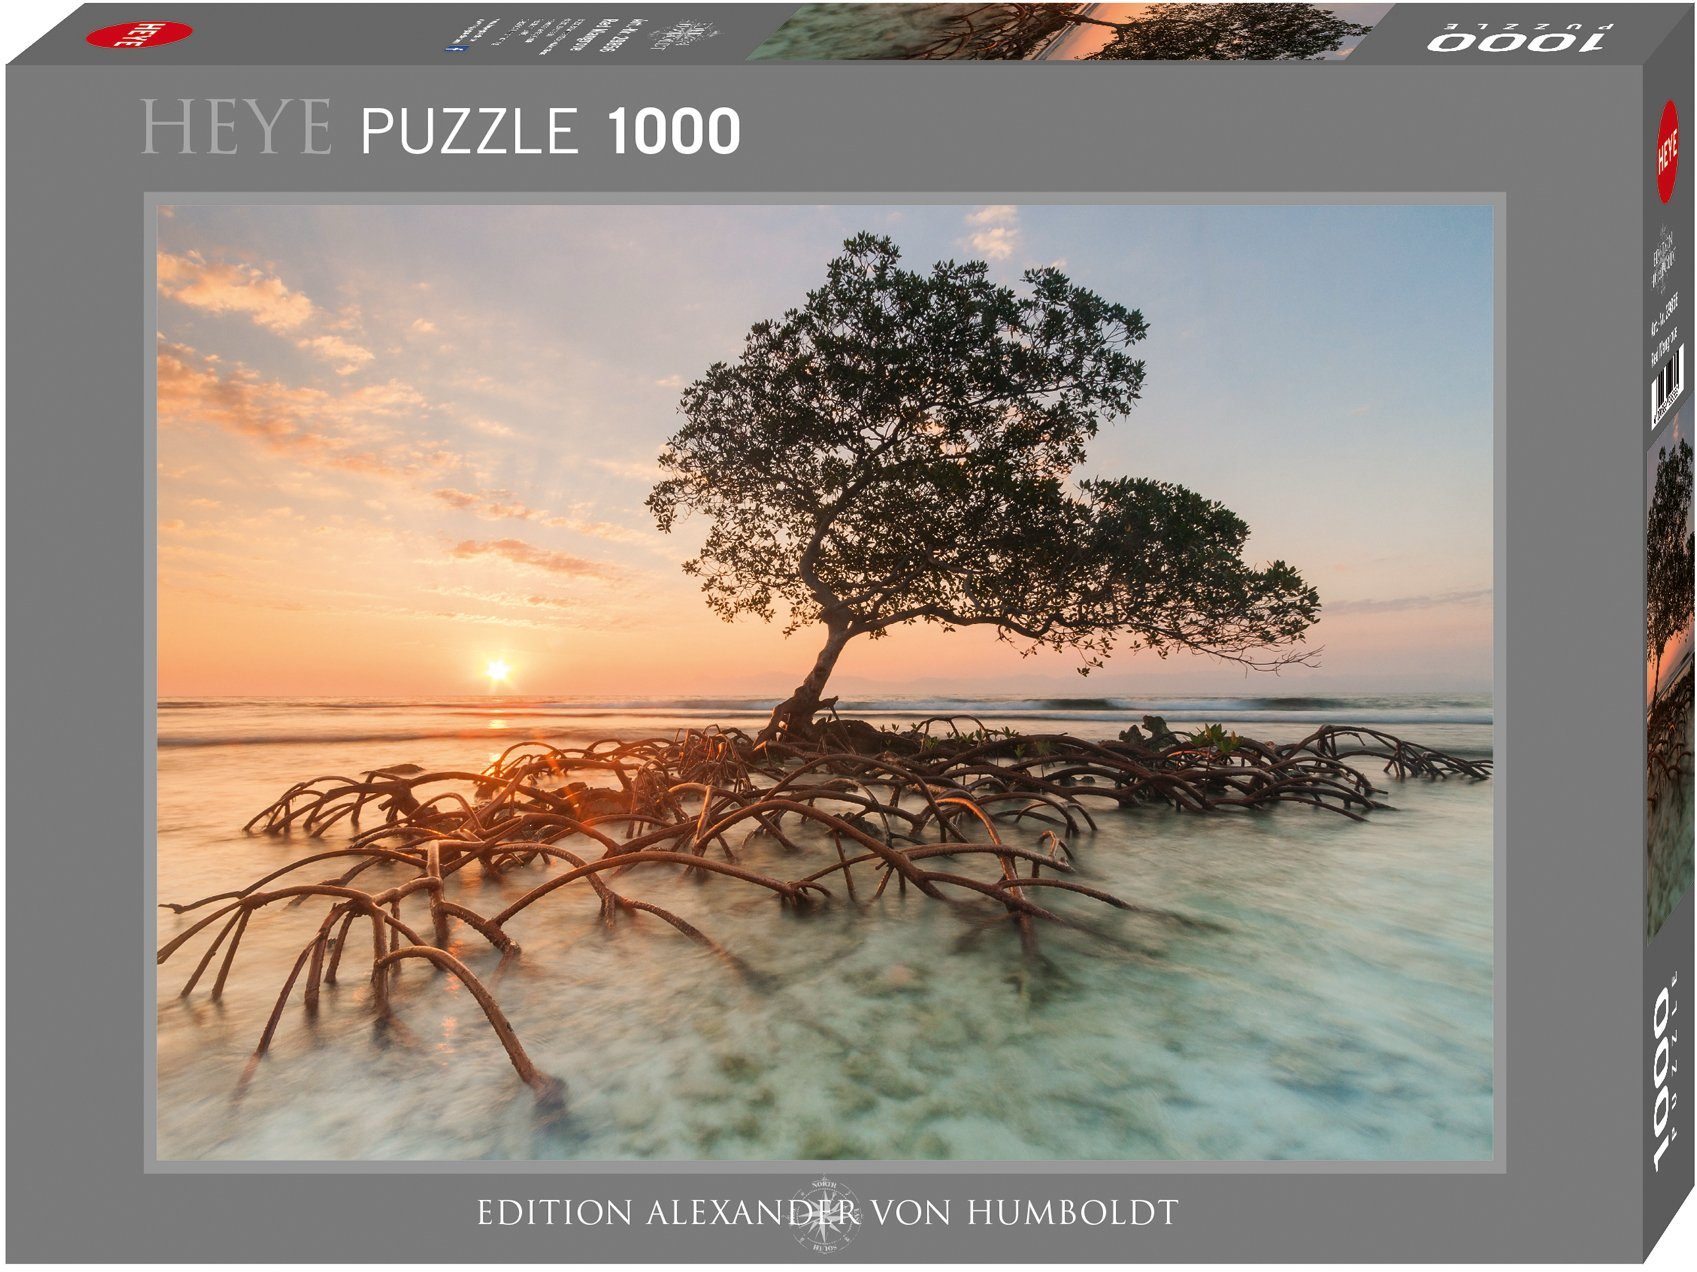 Made Mangrove, 1000 Germany HEYE Puzzle Puzzleteile, in Red